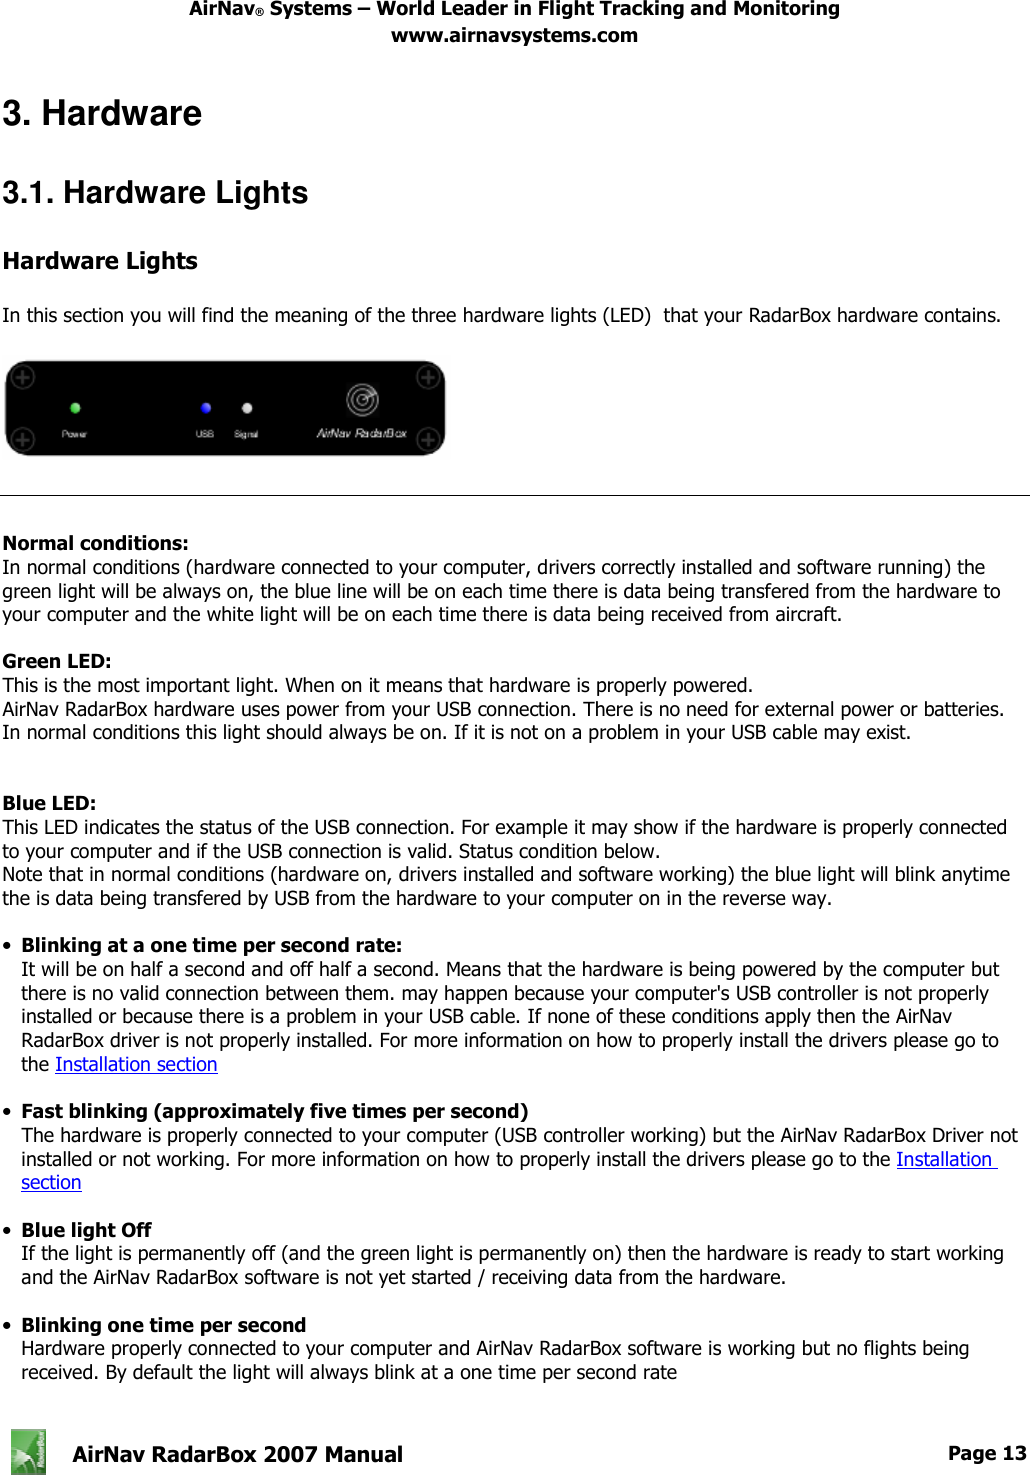 AirNav® Systems – World Leader in Flight Tracking and Monitoring www.airnavsystems.com   AirNav RadarBox 2007 Manual  Page 13       3. Hardware  3.1. Hardware Lights  Hardware Lights  In this section you will find the meaning of the three hardware lights (LED)  that your RadarBox hardware contains.       Normal conditions: In normal conditions (hardware connected to your computer, drivers correctly installed and software running) the green light will be always on, the blue line will be on each time there is data being transfered from the hardware to your computer and the white light will be on each time there is data being received from aircraft.  Green LED: This is the most important light. When on it means that hardware is properly powered. AirNav RadarBox hardware uses power from your USB connection. There is no need for external power or batteries. In normal conditions this light should always be on. If it is not on a problem in your USB cable may exist.   Blue LED: This LED indicates the status of the USB connection. For example it may show if the hardware is properly connected to your computer and if the USB connection is valid. Status condition below. Note that in normal conditions (hardware on, drivers installed and software working) the blue light will blink anytime the is data being transfered by USB from the hardware to your computer on in the reverse way.  •  Blinking at a one time per second rate: It will be on half a second and off half a second. Means that the hardware is being powered by the computer but there is no valid connection between them. may happen because your computer&apos;s USB controller is not properly installed or because there is a problem in your USB cable. If none of these conditions apply then the AirNav RadarBox driver is not properly installed. For more information on how to properly install the drivers please go to the Installation section  •  Fast blinking (approximately five times per second) The hardware is properly connected to your computer (USB controller working) but the AirNav RadarBox Driver not installed or not working. For more information on how to properly install the drivers please go to the Installation section  •  Blue light Off If the light is permanently off (and the green light is permanently on) then the hardware is ready to start working and the AirNav RadarBox software is not yet started / receiving data from the hardware.  •  Blinking one time per second Hardware properly connected to your computer and AirNav RadarBox software is working but no flights being received. By default the light will always blink at a one time per second rate  